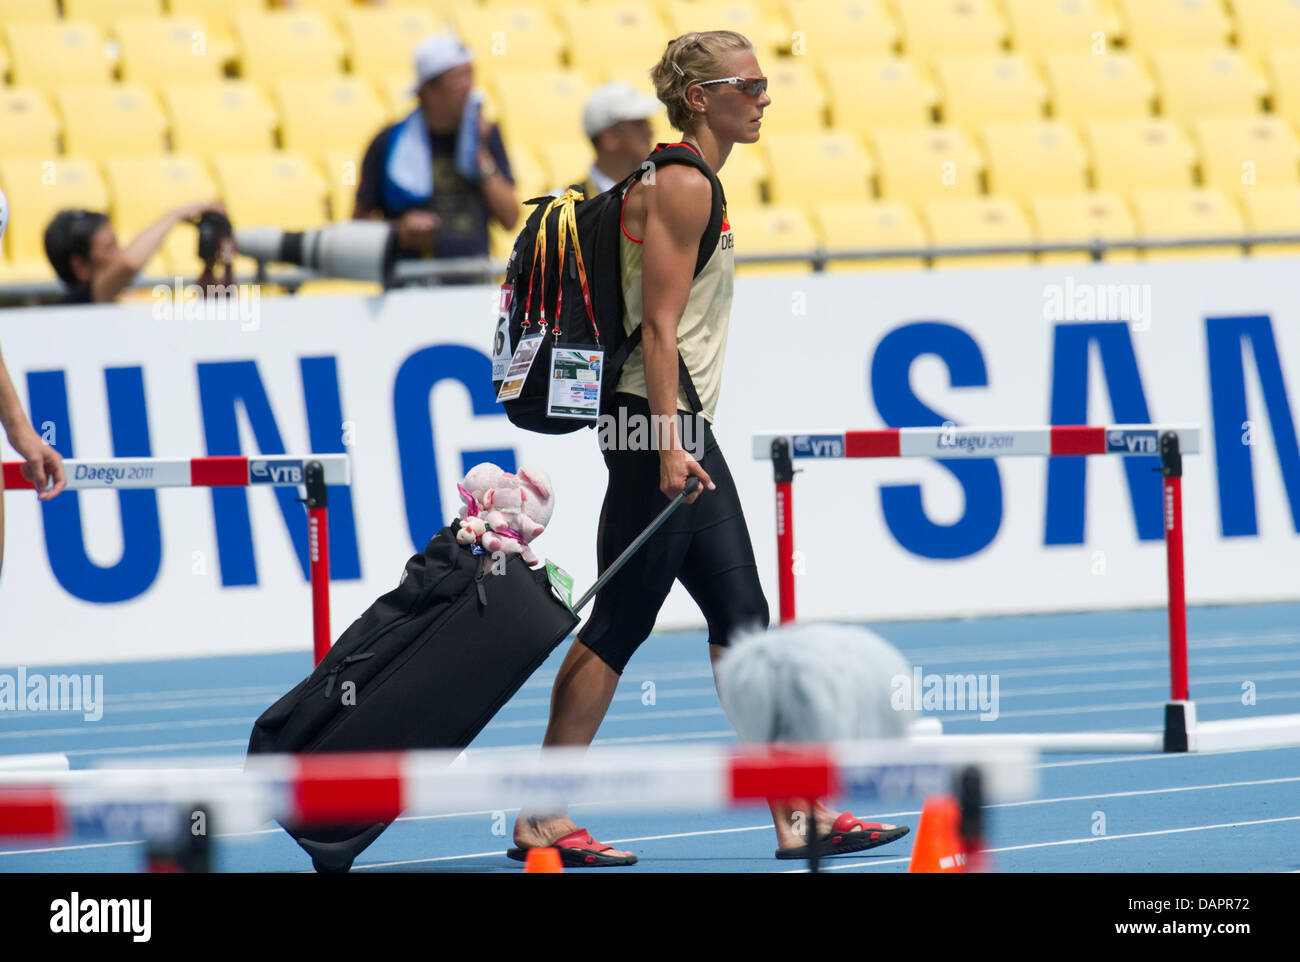 Jennifer Oeser of Germany leaves the stadium after participating in the womens High Jump event of the Heptathlon competition at the 13th IAAF World Championships in Athletics, in Daegu, Republic of Korea, 29 August 2011. Photo: Bernd Thissen dpa Stock Photo